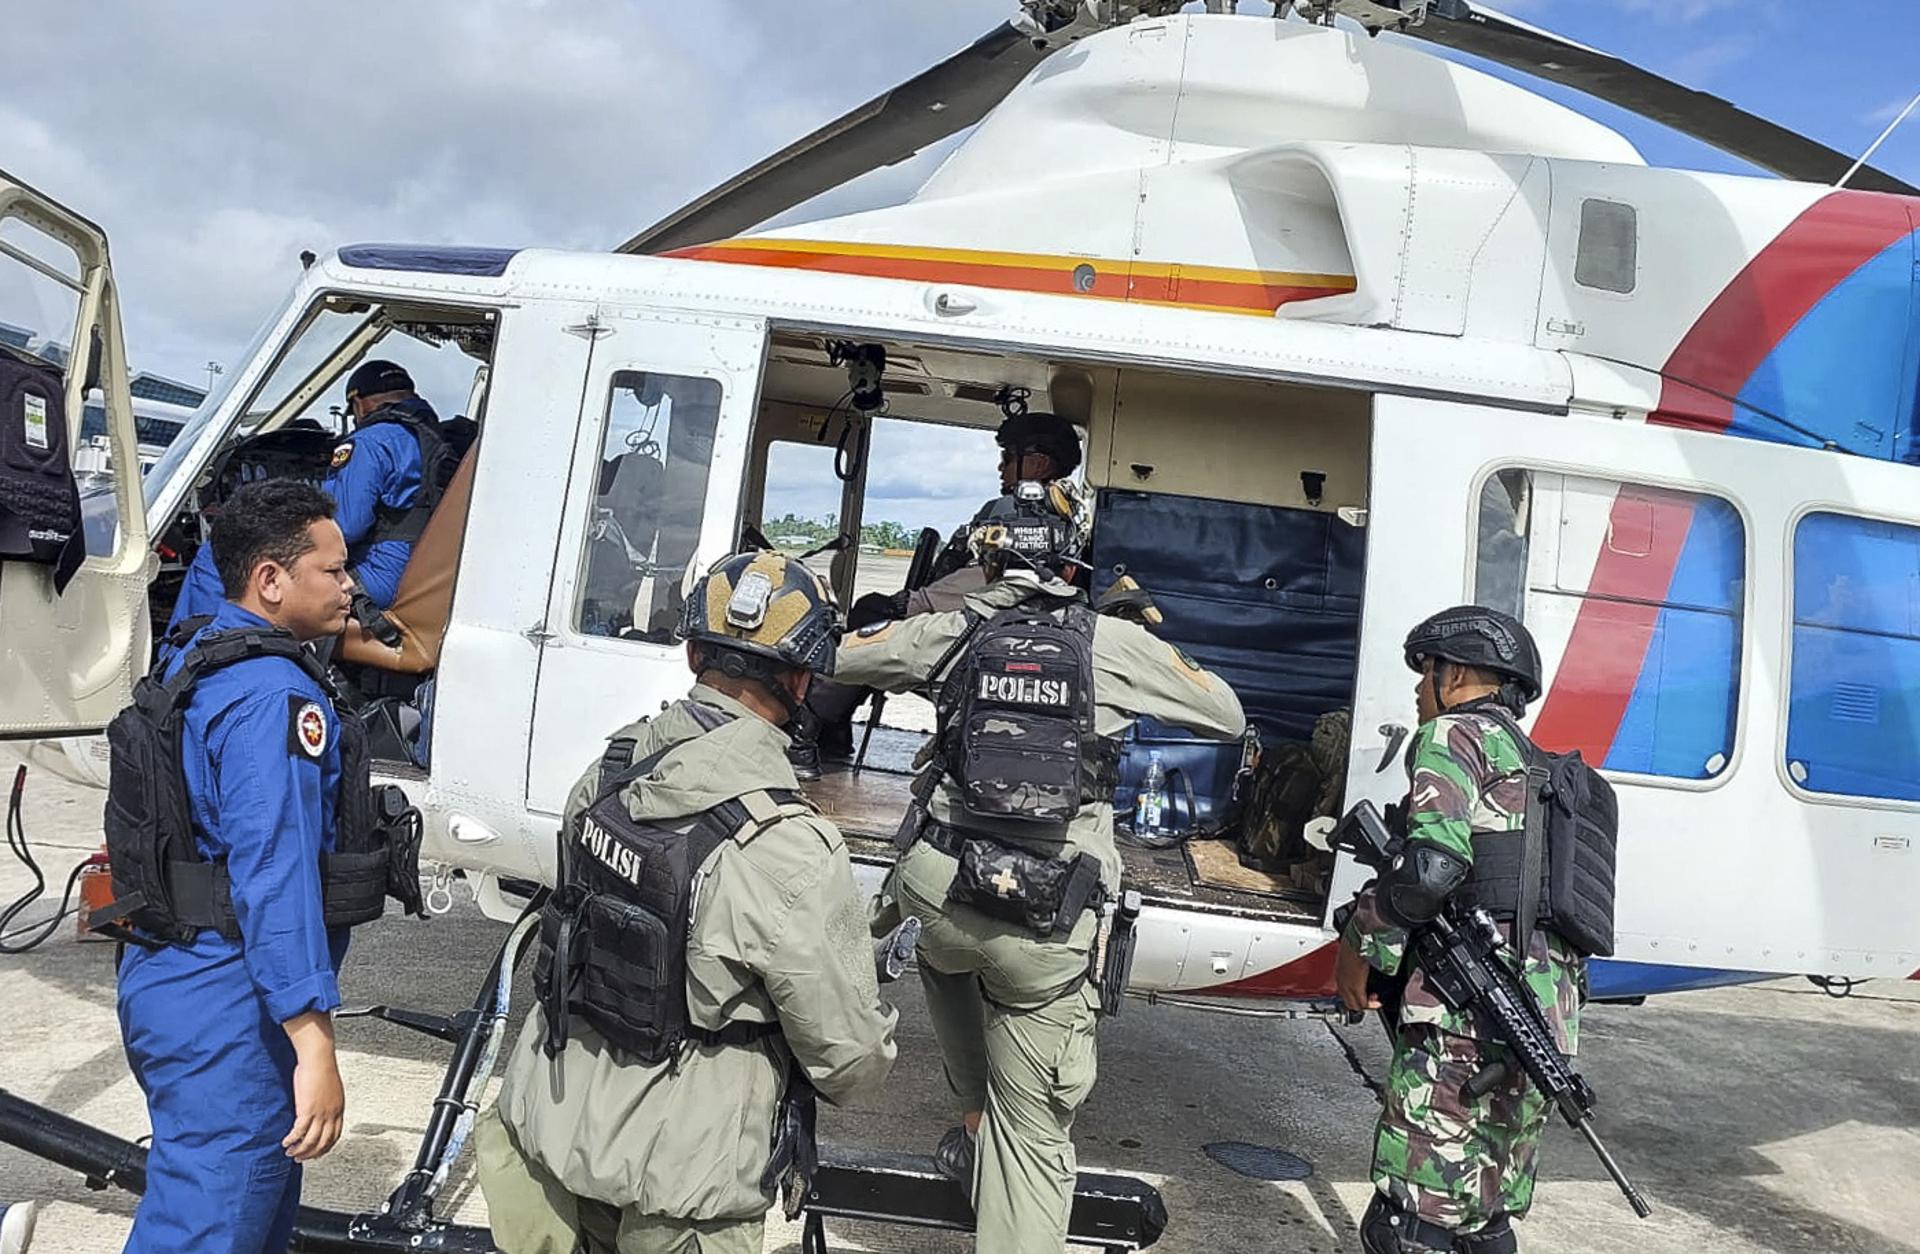 A handout photo made available by Papua Police Headquarters shows Indonesian police and military personnel boarding an helicopter during a search and rescue operation for Susi Air pilot and passengers at an airport in Timika, Papua, Indonesia 08 February 2023. EFE/EPA/FILE/PAPUA POLICE HEADQUARTERS / HANDOUT HANDOUT HANDOUT EDITORIAL USE ONLY/NO SALES